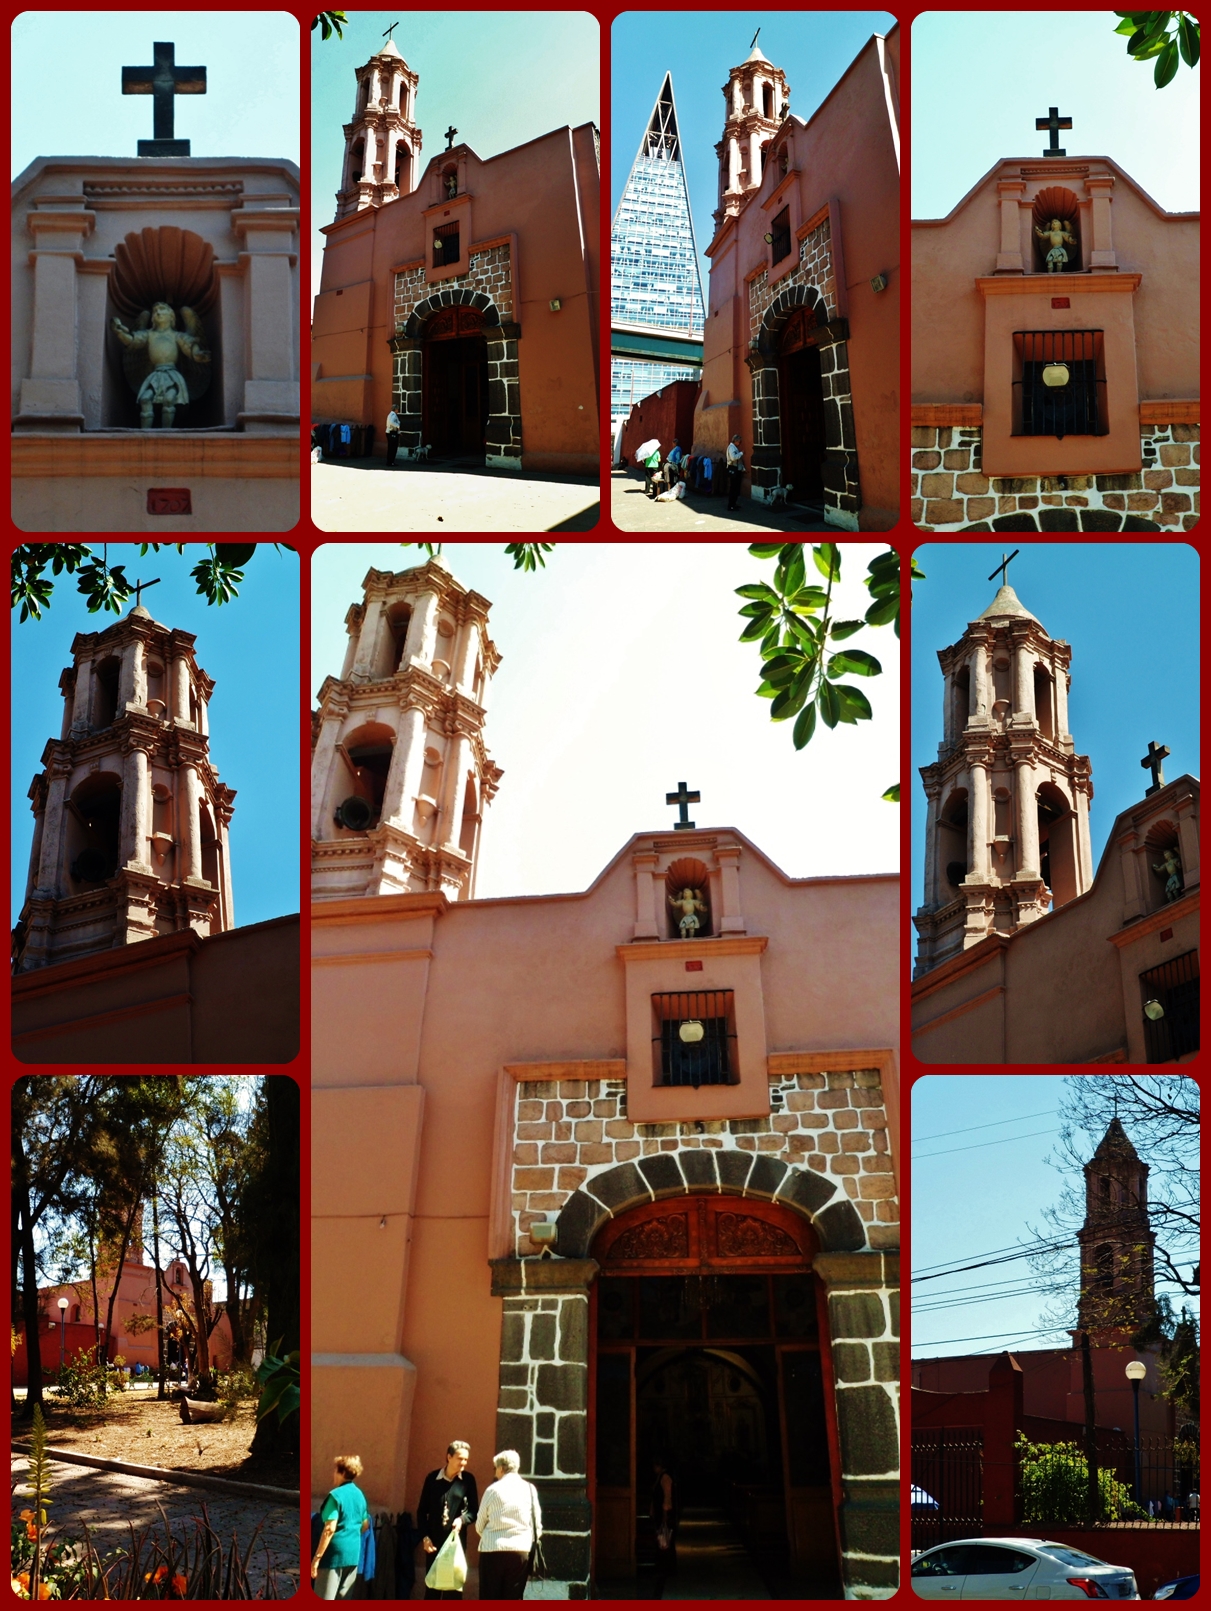 a po collage shows the front and front side of a church